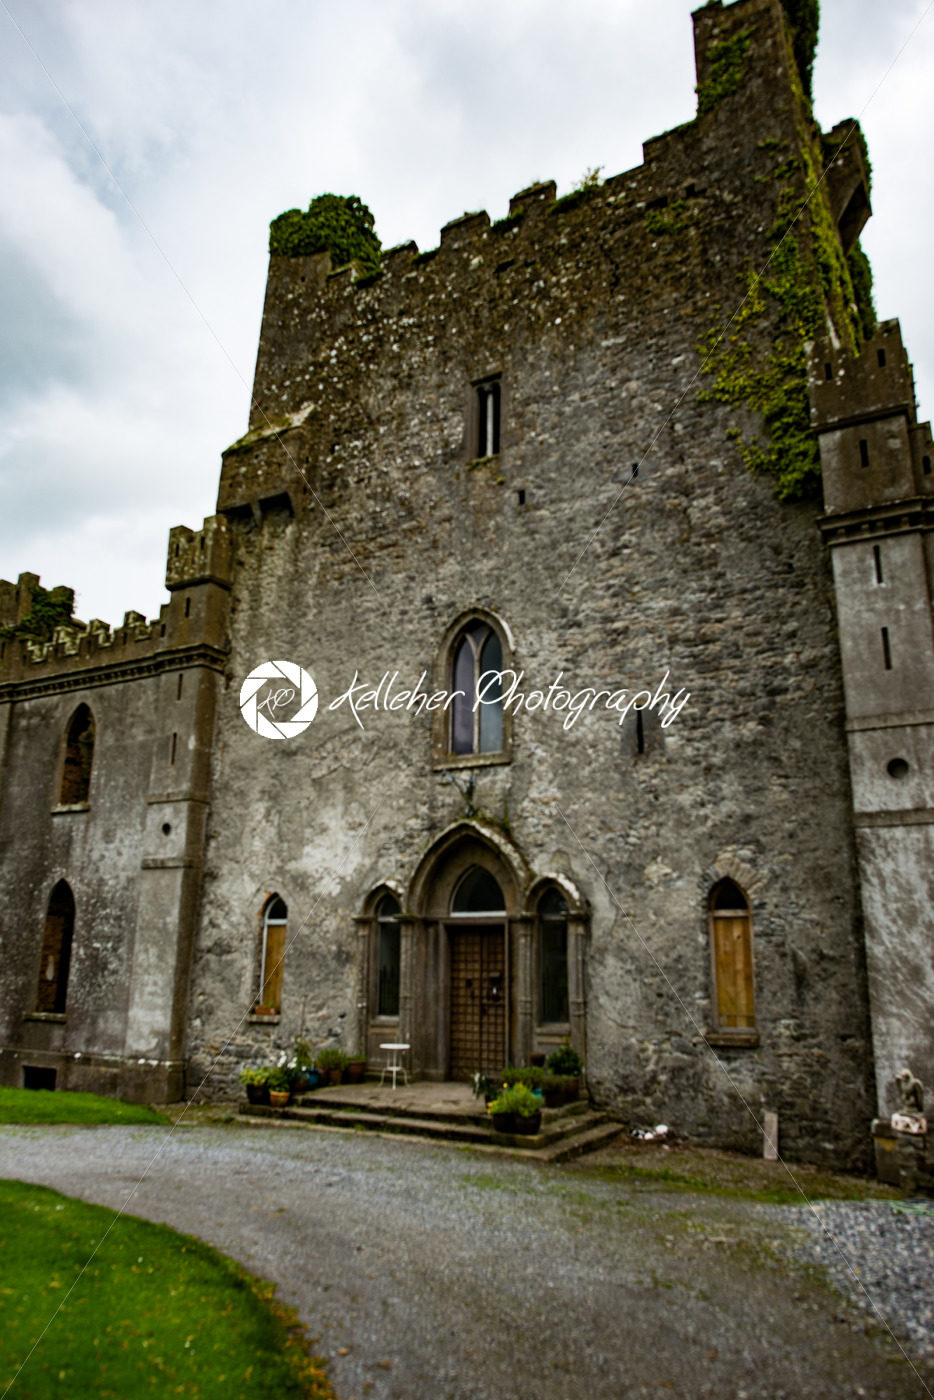 COUNTY OFFALY, IRELAND – AUGUST 23, 2017: Leap castle is one of the most haunted castles in Ireland - Kelleher Photography Store